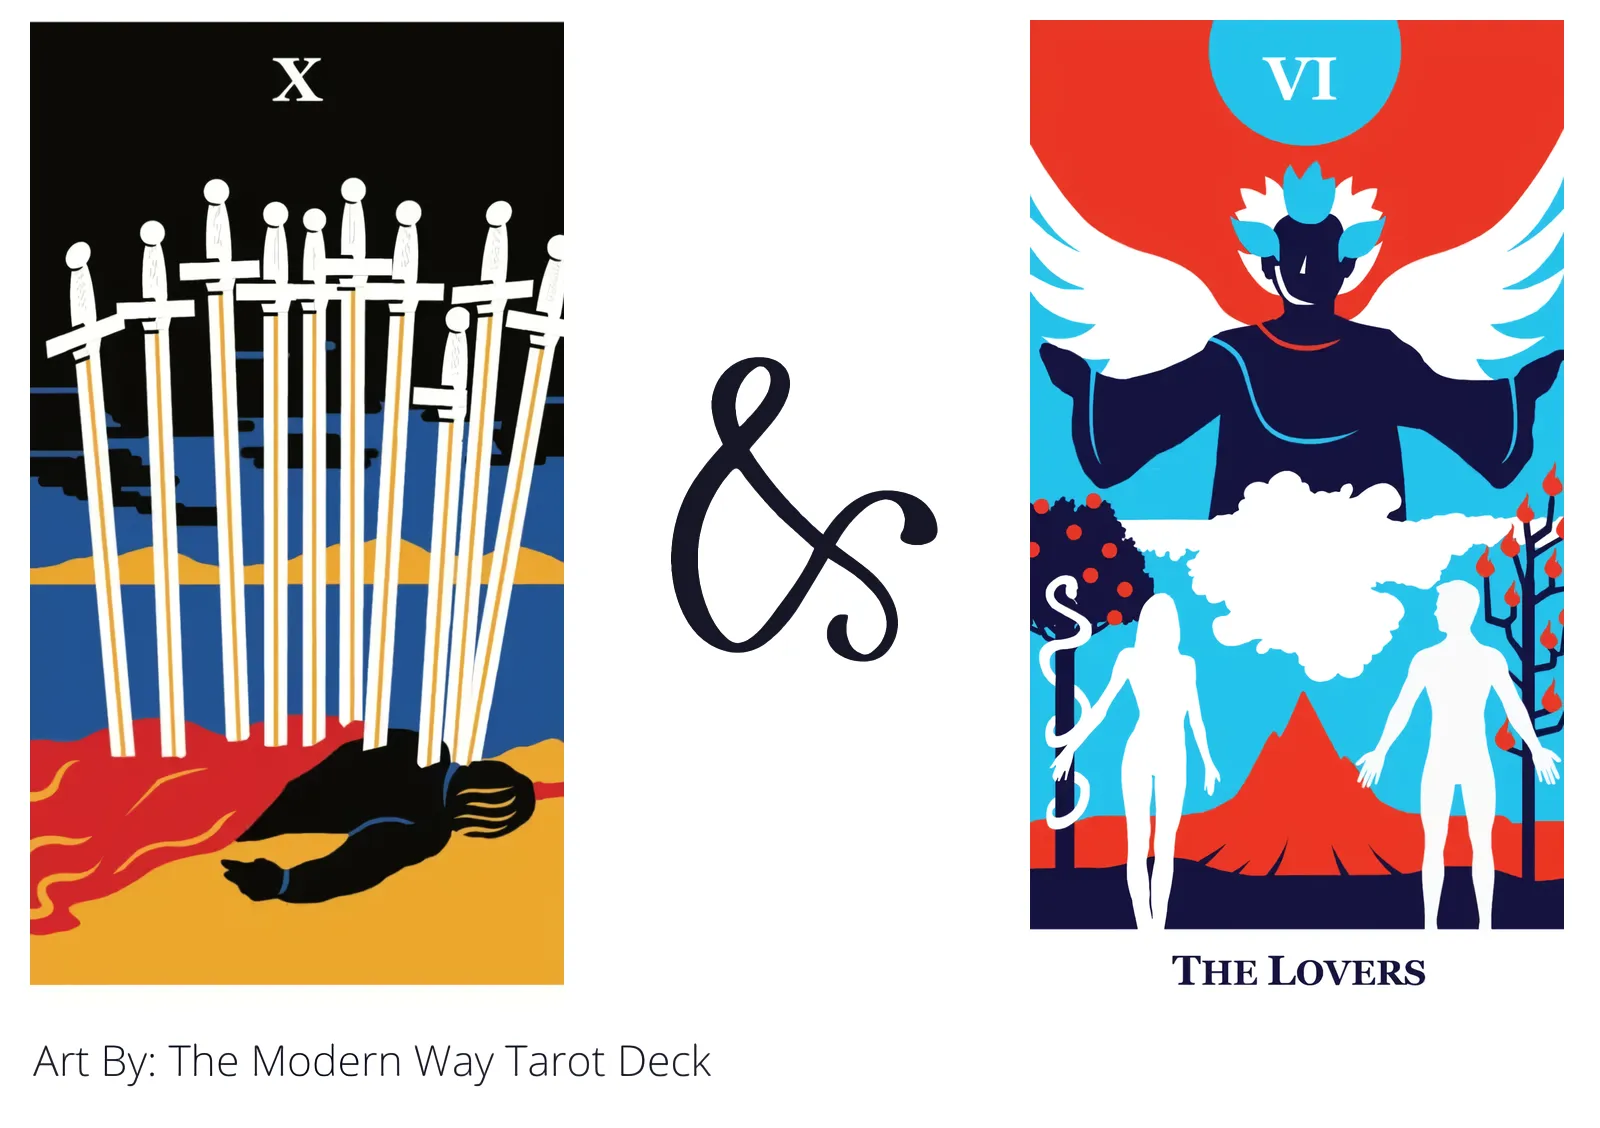 ten of swords and the lovers tarot cards together